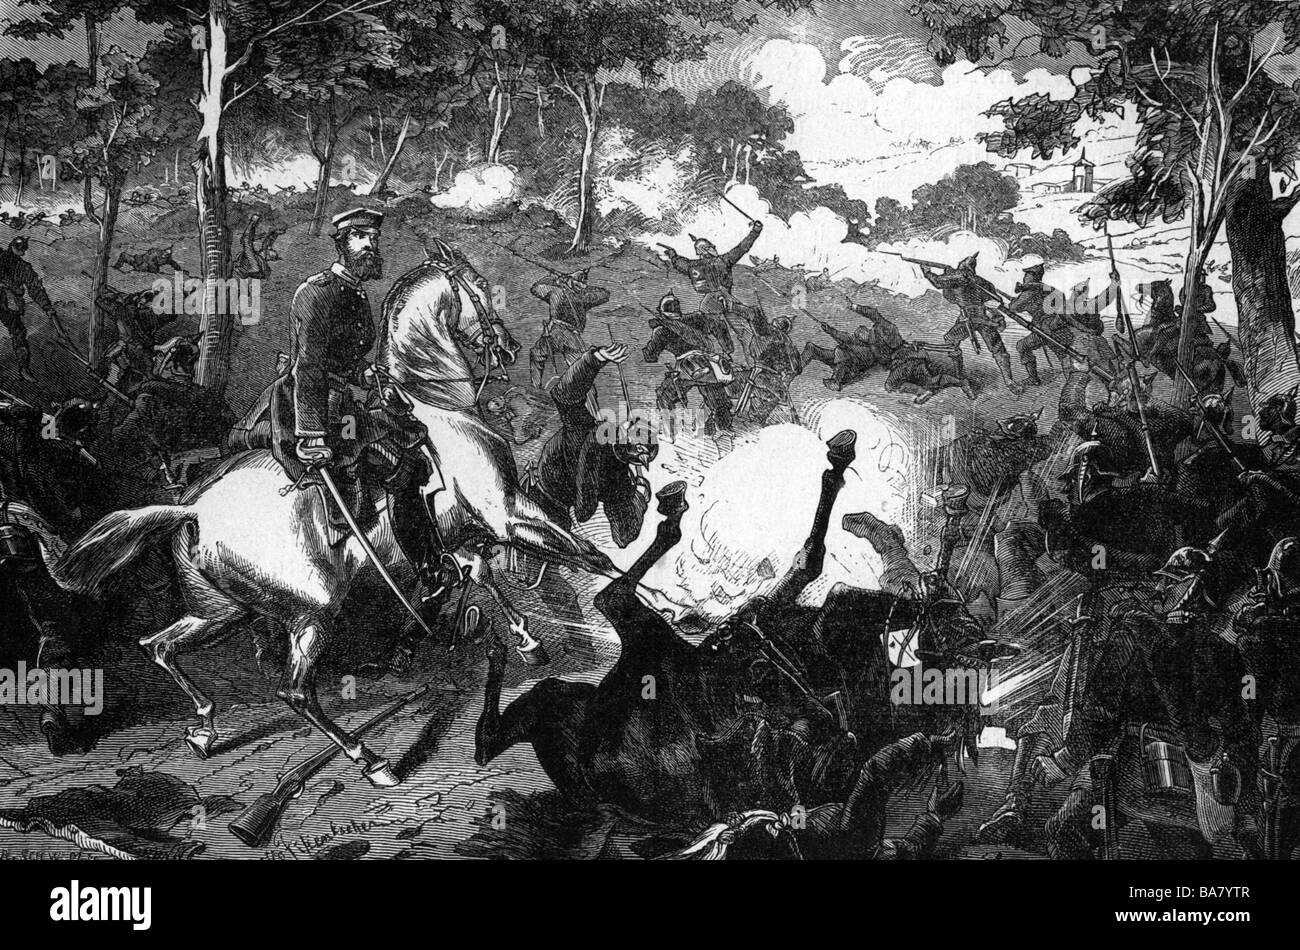 events, Franco-Prussian War 1870 - 1871, Battle of Mars-la-Tour, 16.8.1870, charge of the Hessian Division, wood engraving, 19th century, Vionville, Germans, Hessians, Prince Louis of Hesse, Franco - Prussian, France, historic, historical, people, Stock Photo